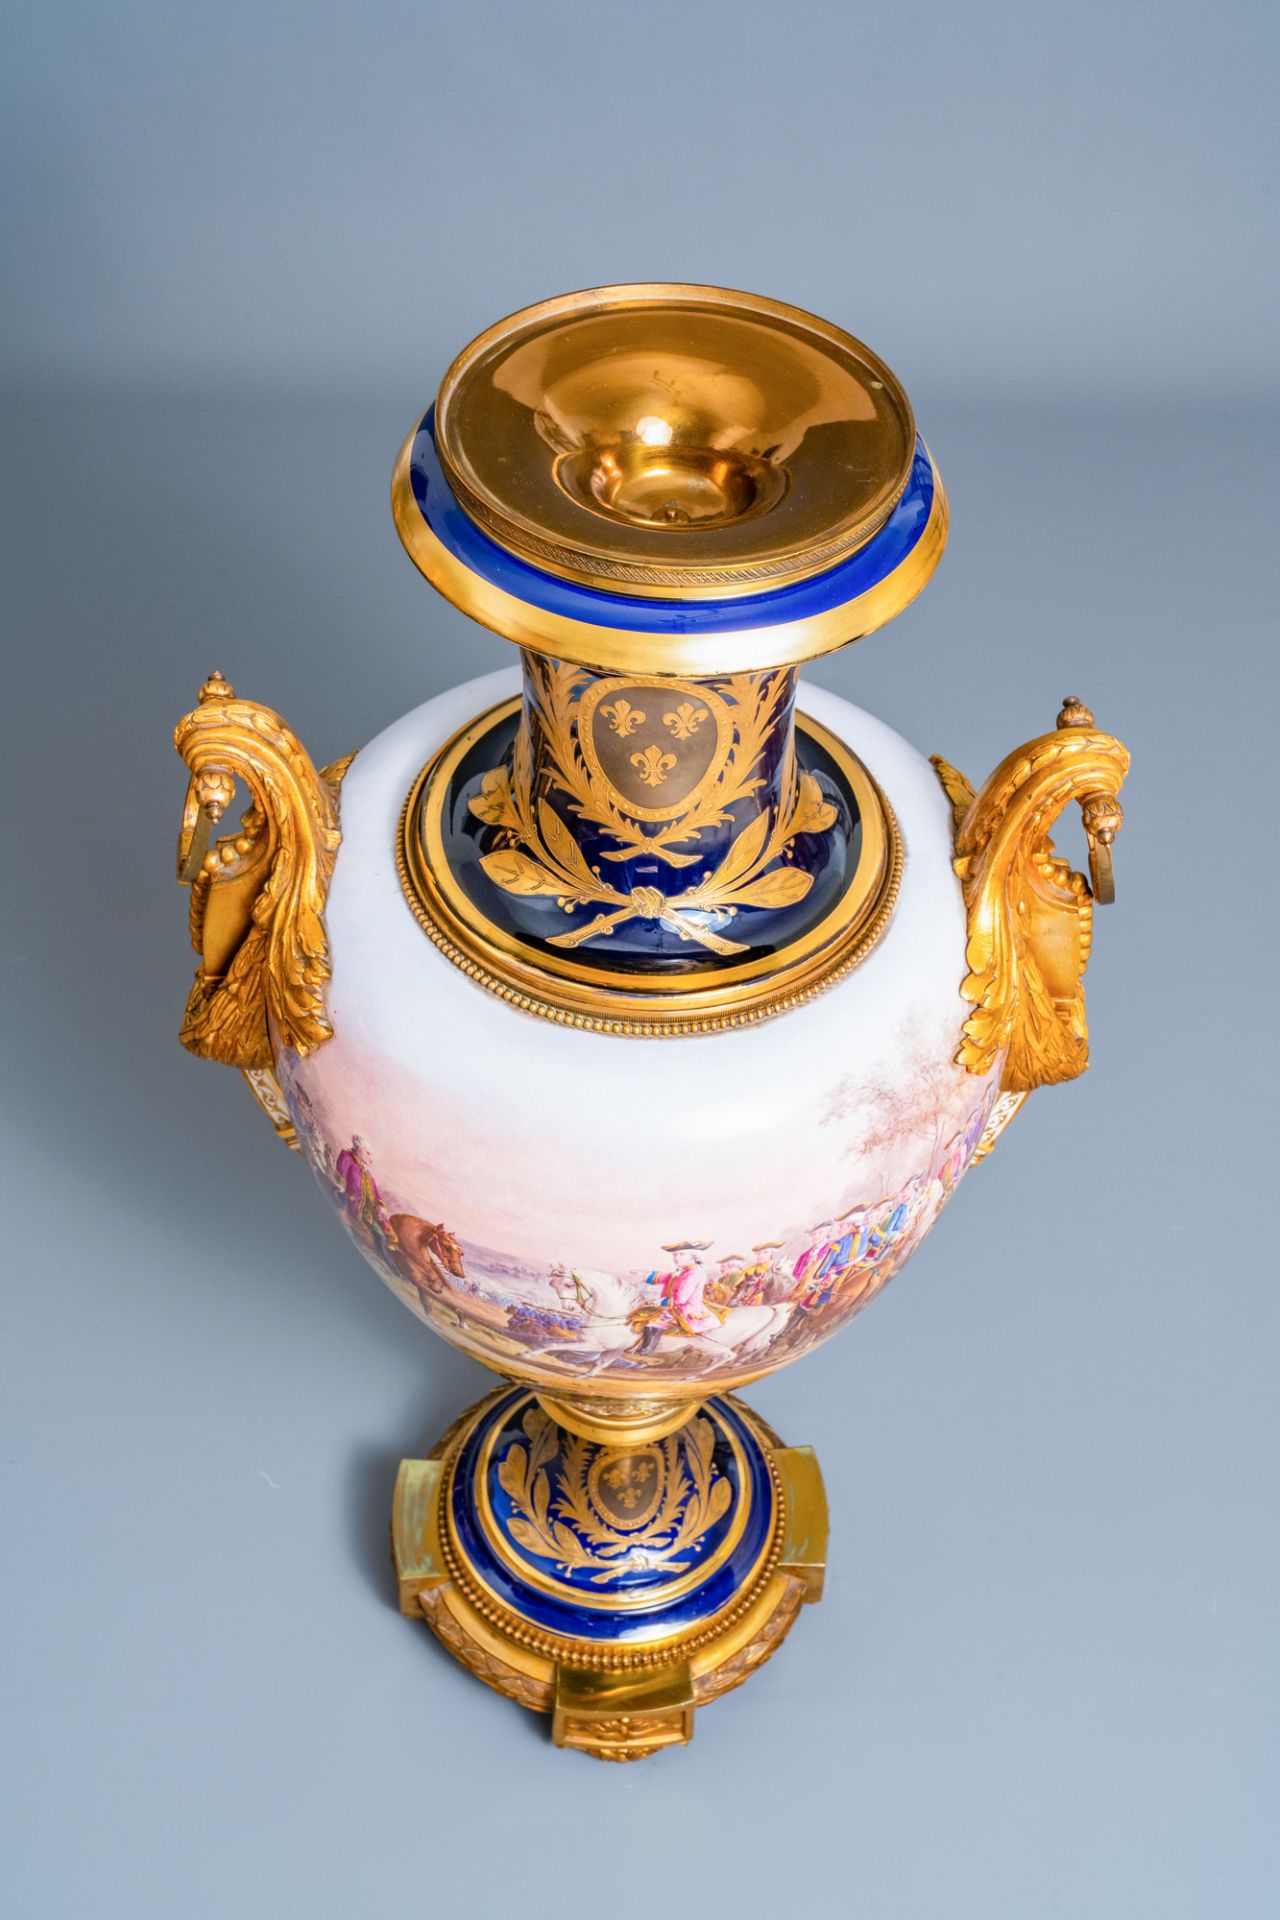 A pair of massive French Svres-style vases with gilded bronze mounts, signed Desprez, 19th C. - Image 11 of 56